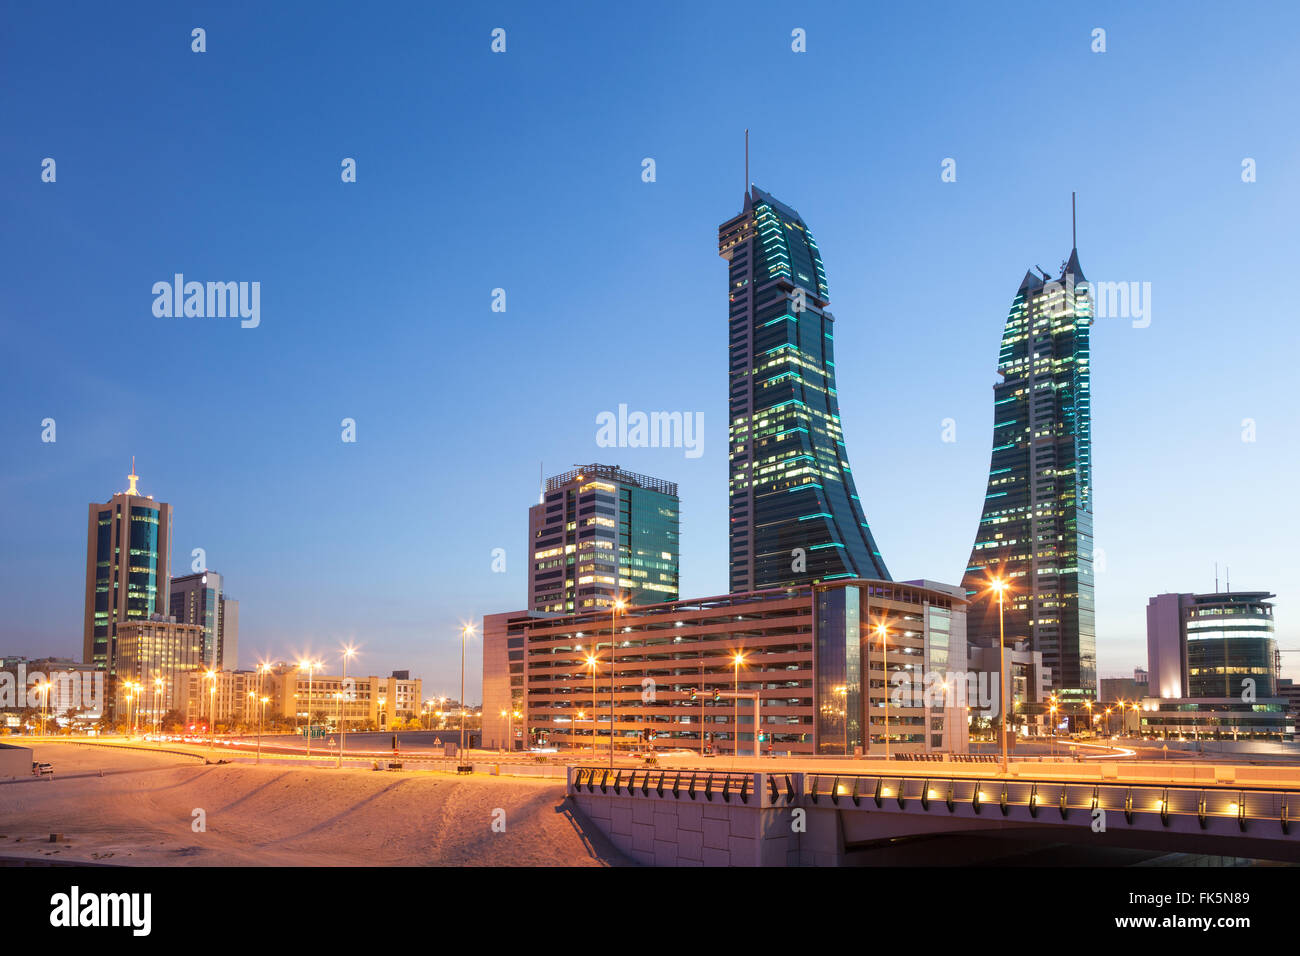 Bahrain Financial Harbour Towers Stock Photo